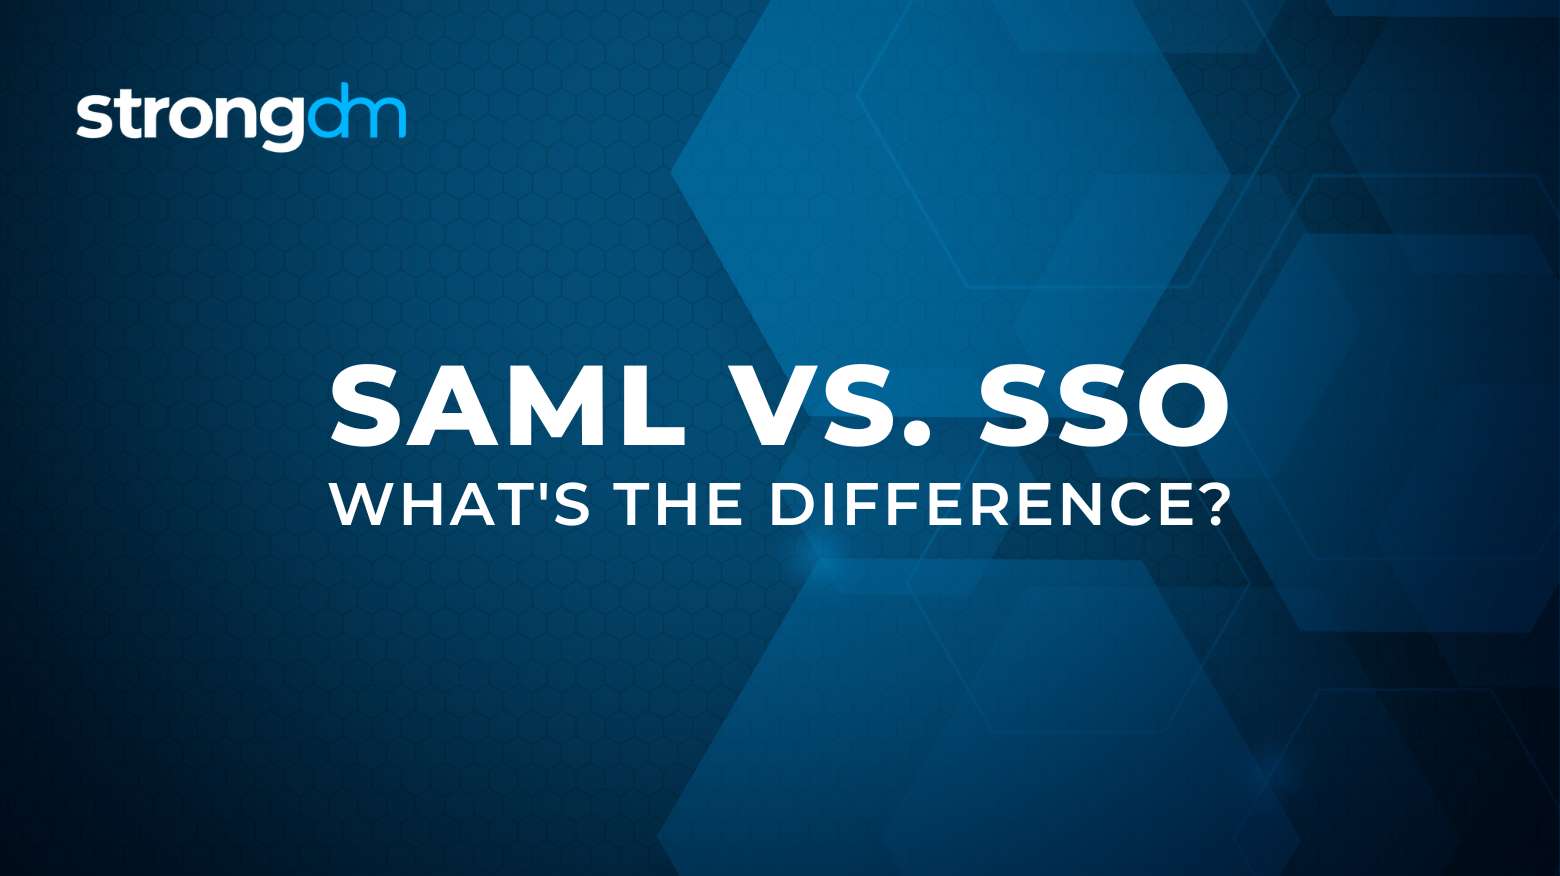 SAML vs. SSO: What's the Difference?